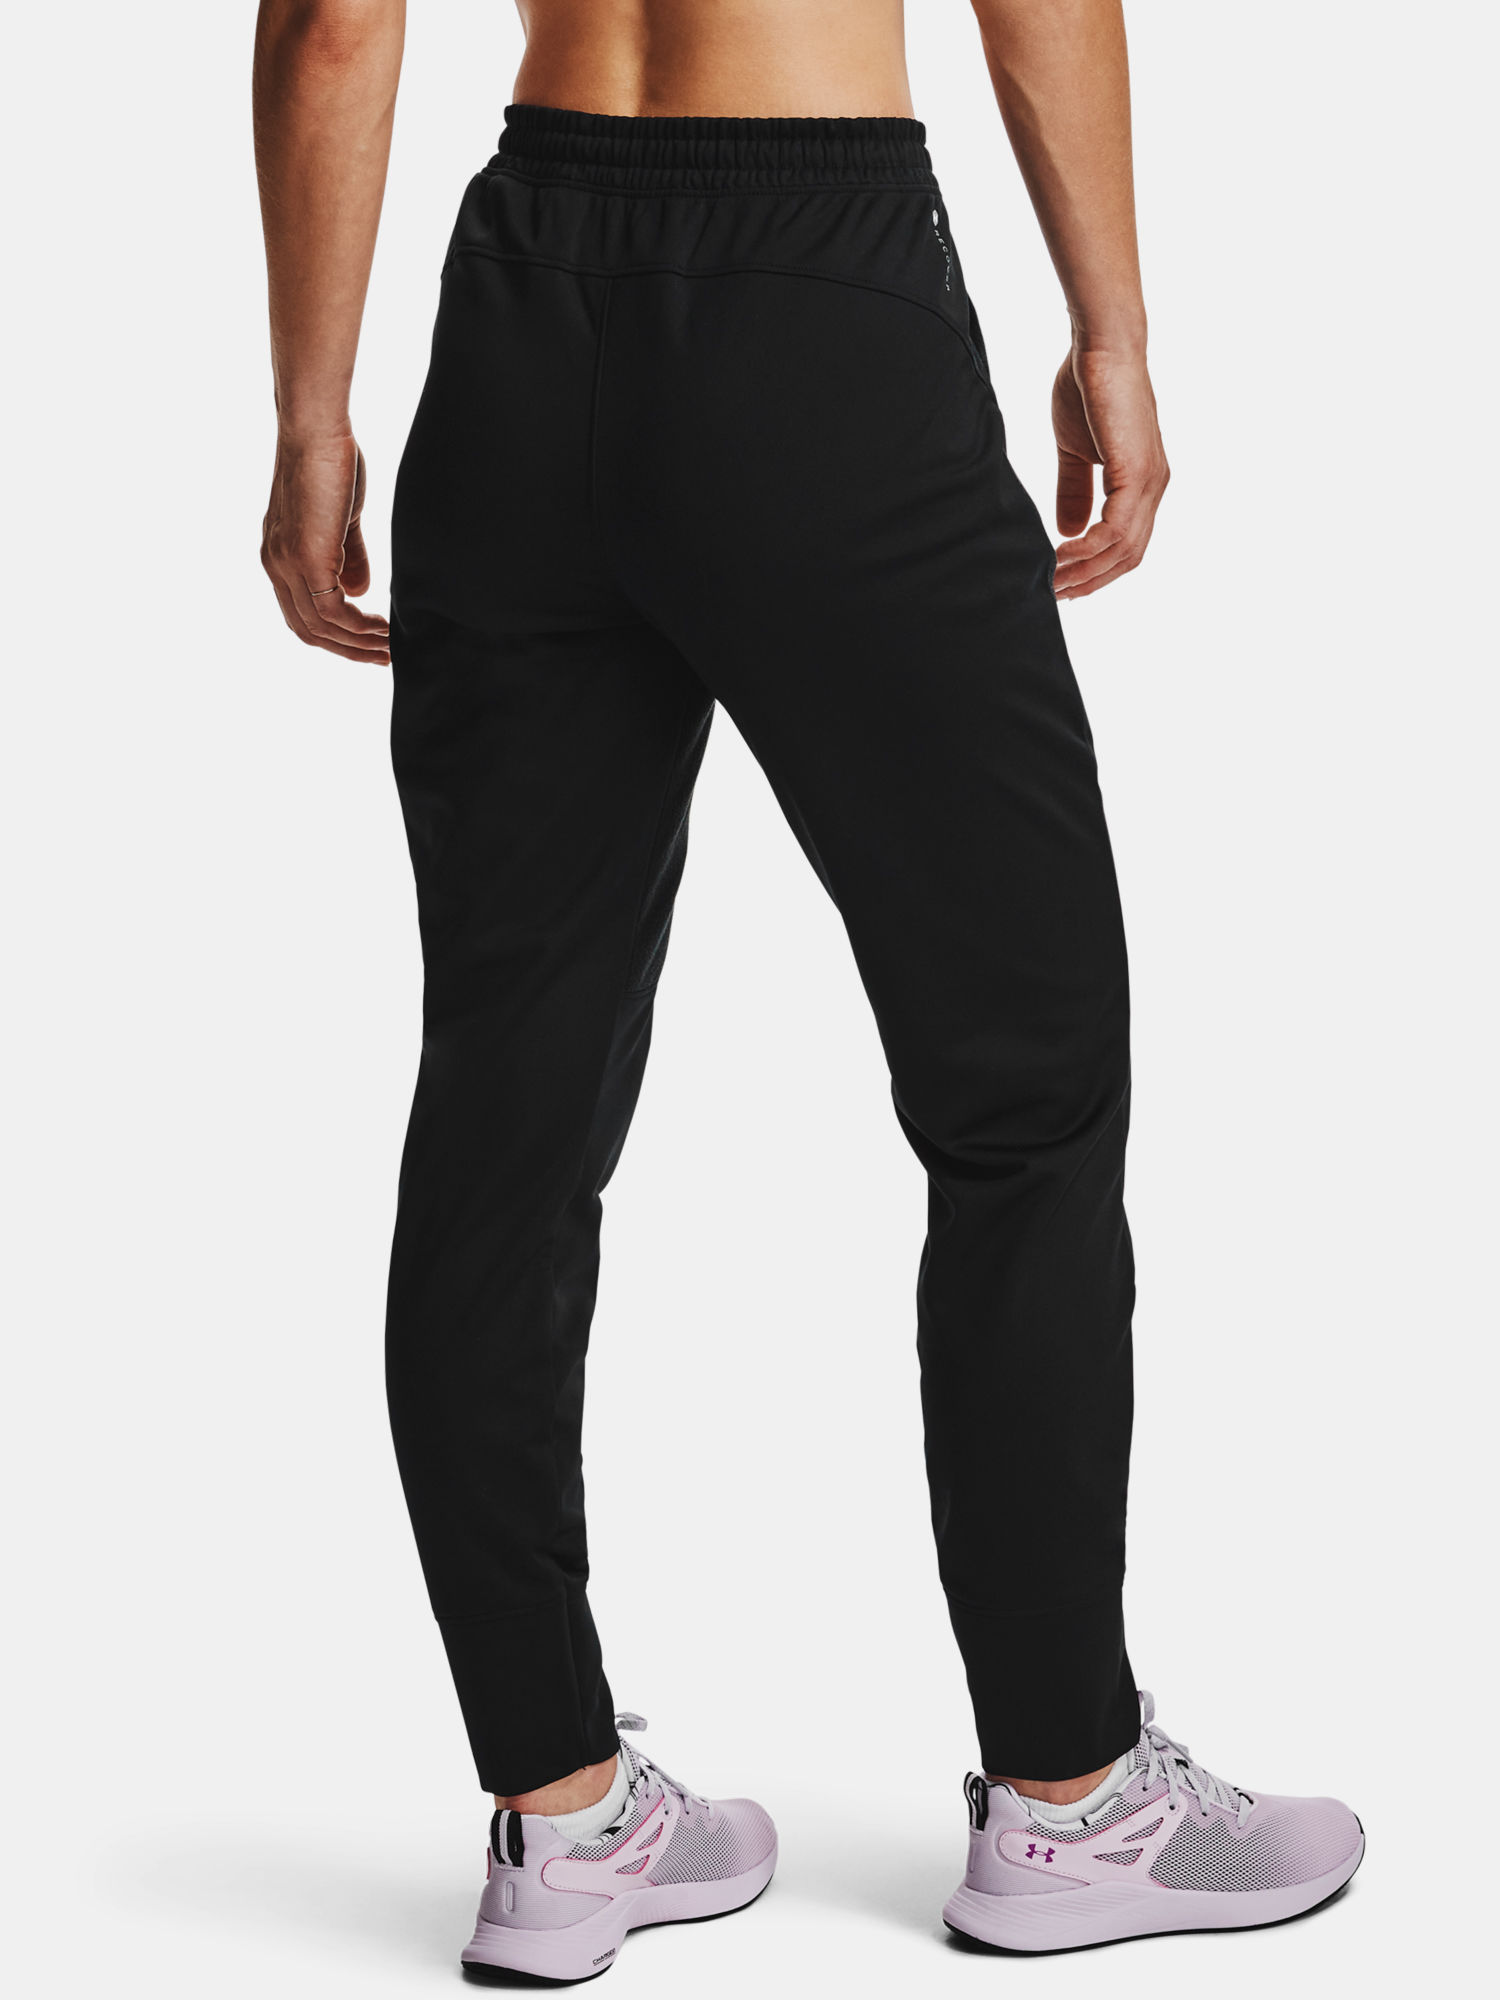 Kalhoty Under Armour Recover Fleece Pants-BLK (2)